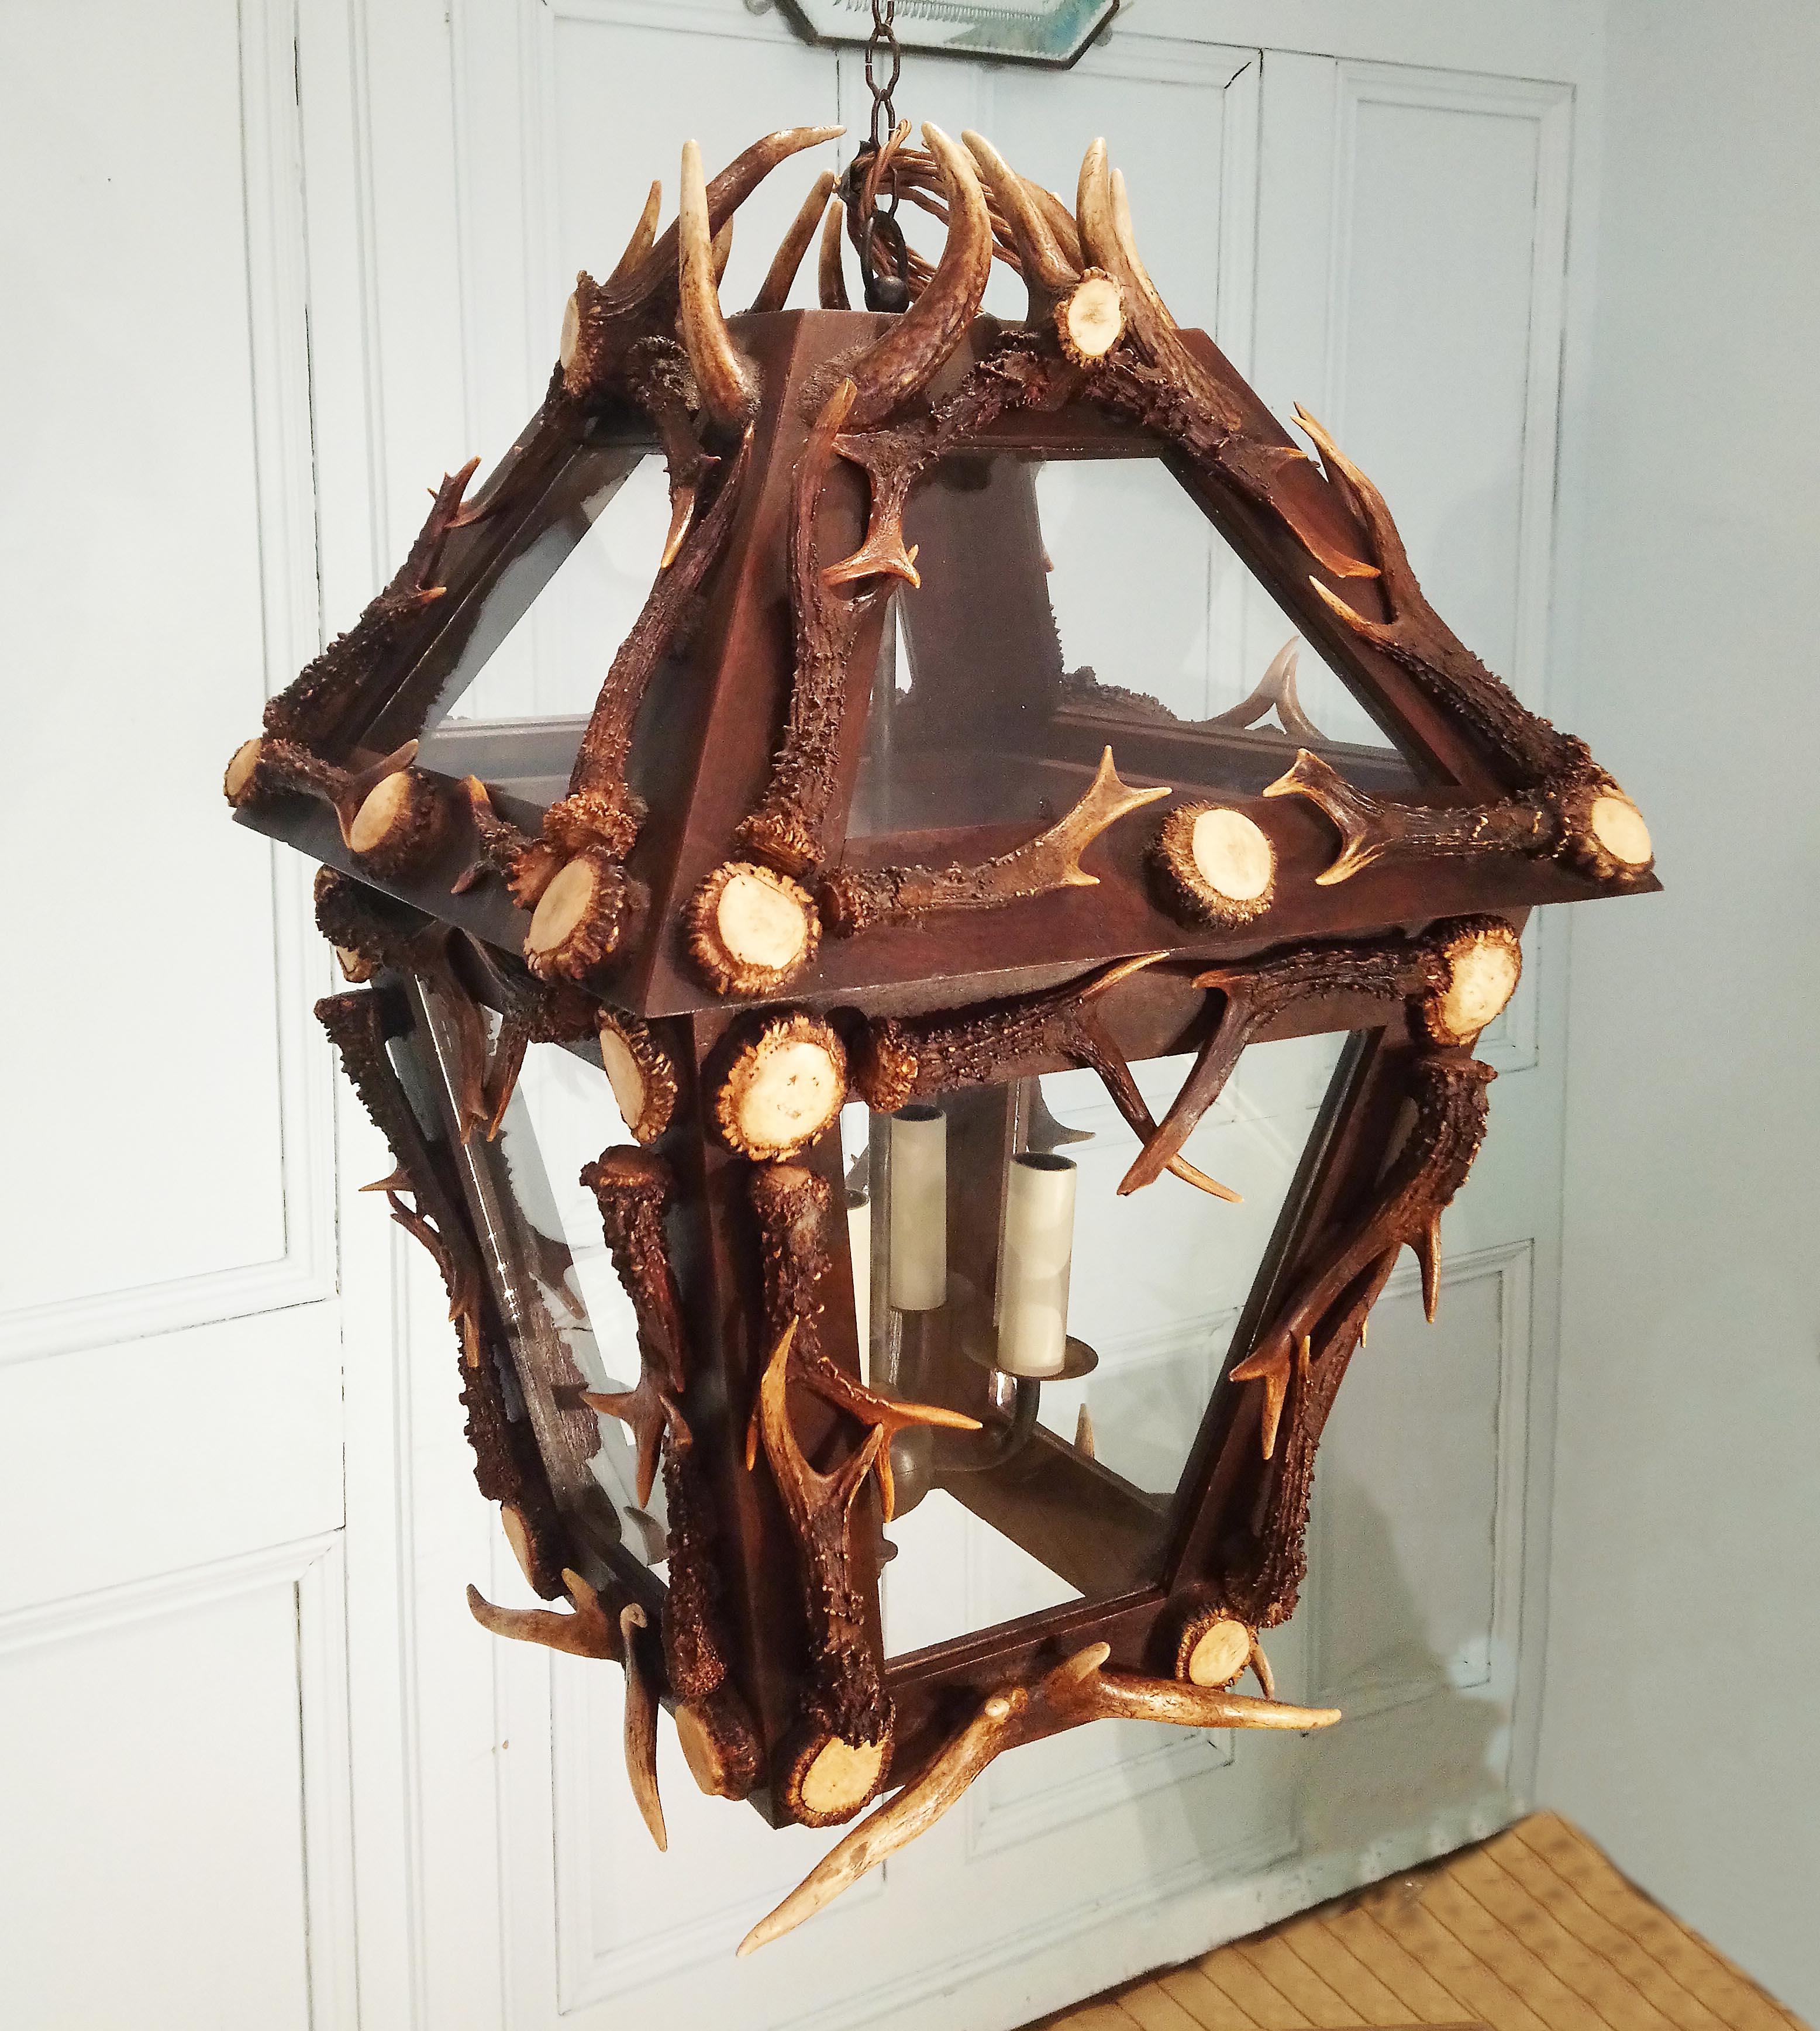 This striking and unique rustic style lantern is designed from naturally shed antler horn from red deer in Scotland. The lantern features eight glass panels set in a mahogany frame and four candle shaped light fittings. The light measures 17 in –